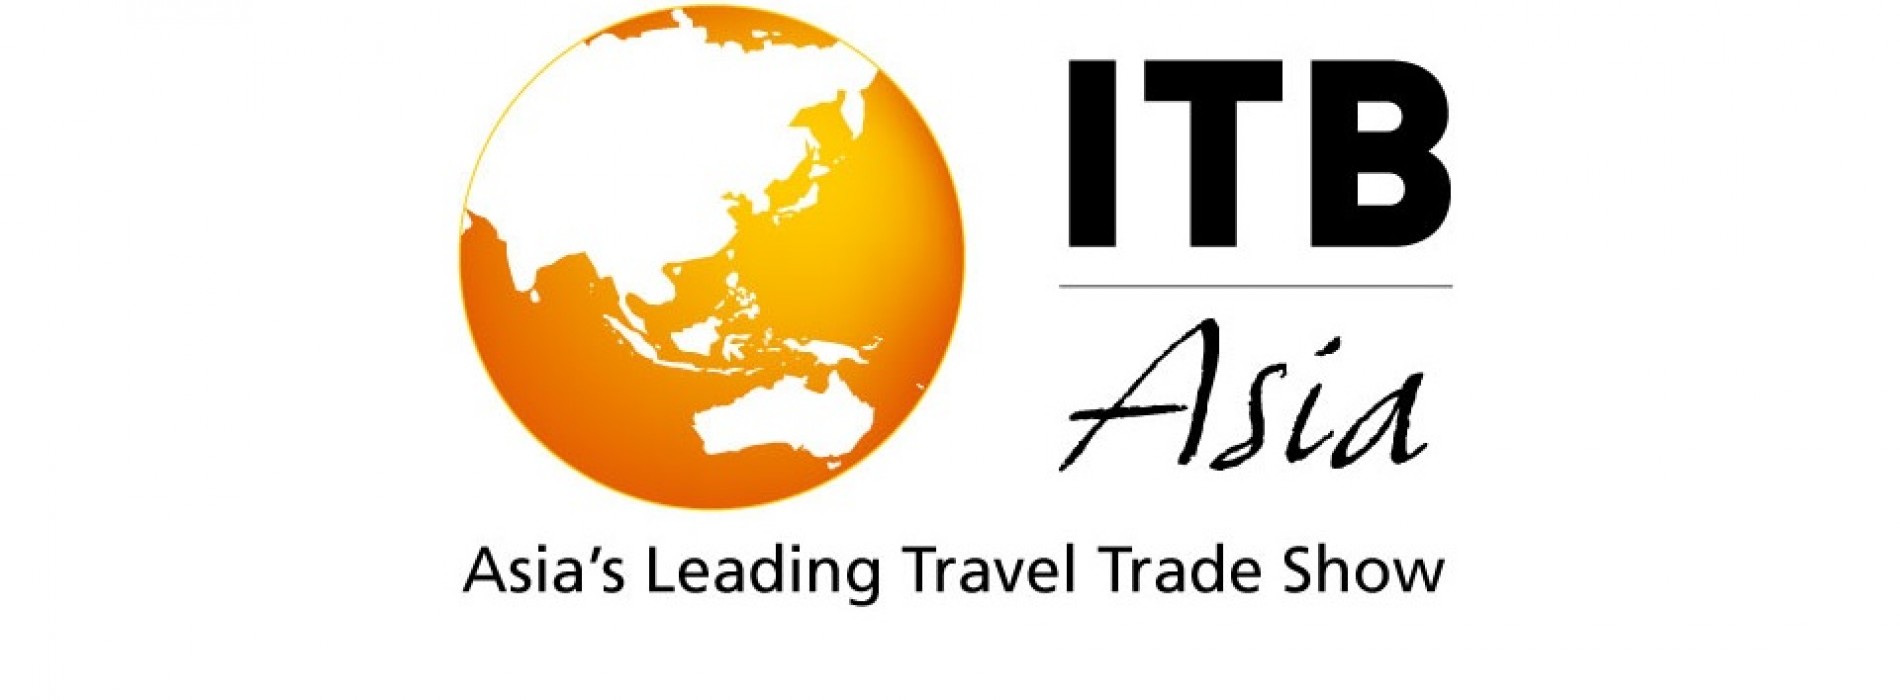 ITB Asia sees record number of new exhibitors for its 11th show in Singapore